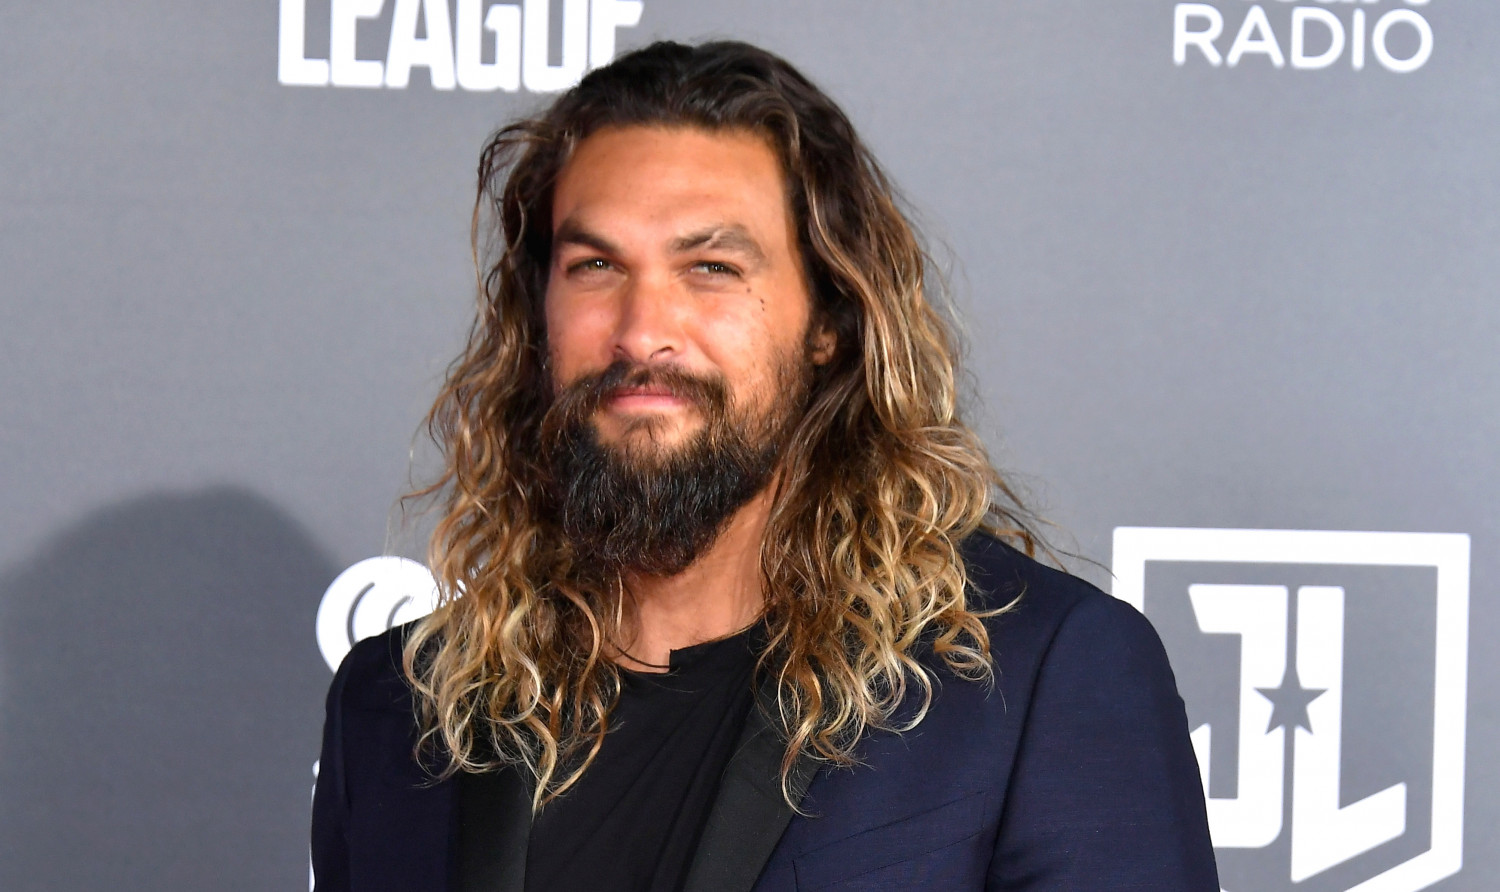 ‘Aquaman’ Star Jason Momoa Shares ‘Game of Thrones’ Photo, When He Was Too ‘Broke to Fly Home’